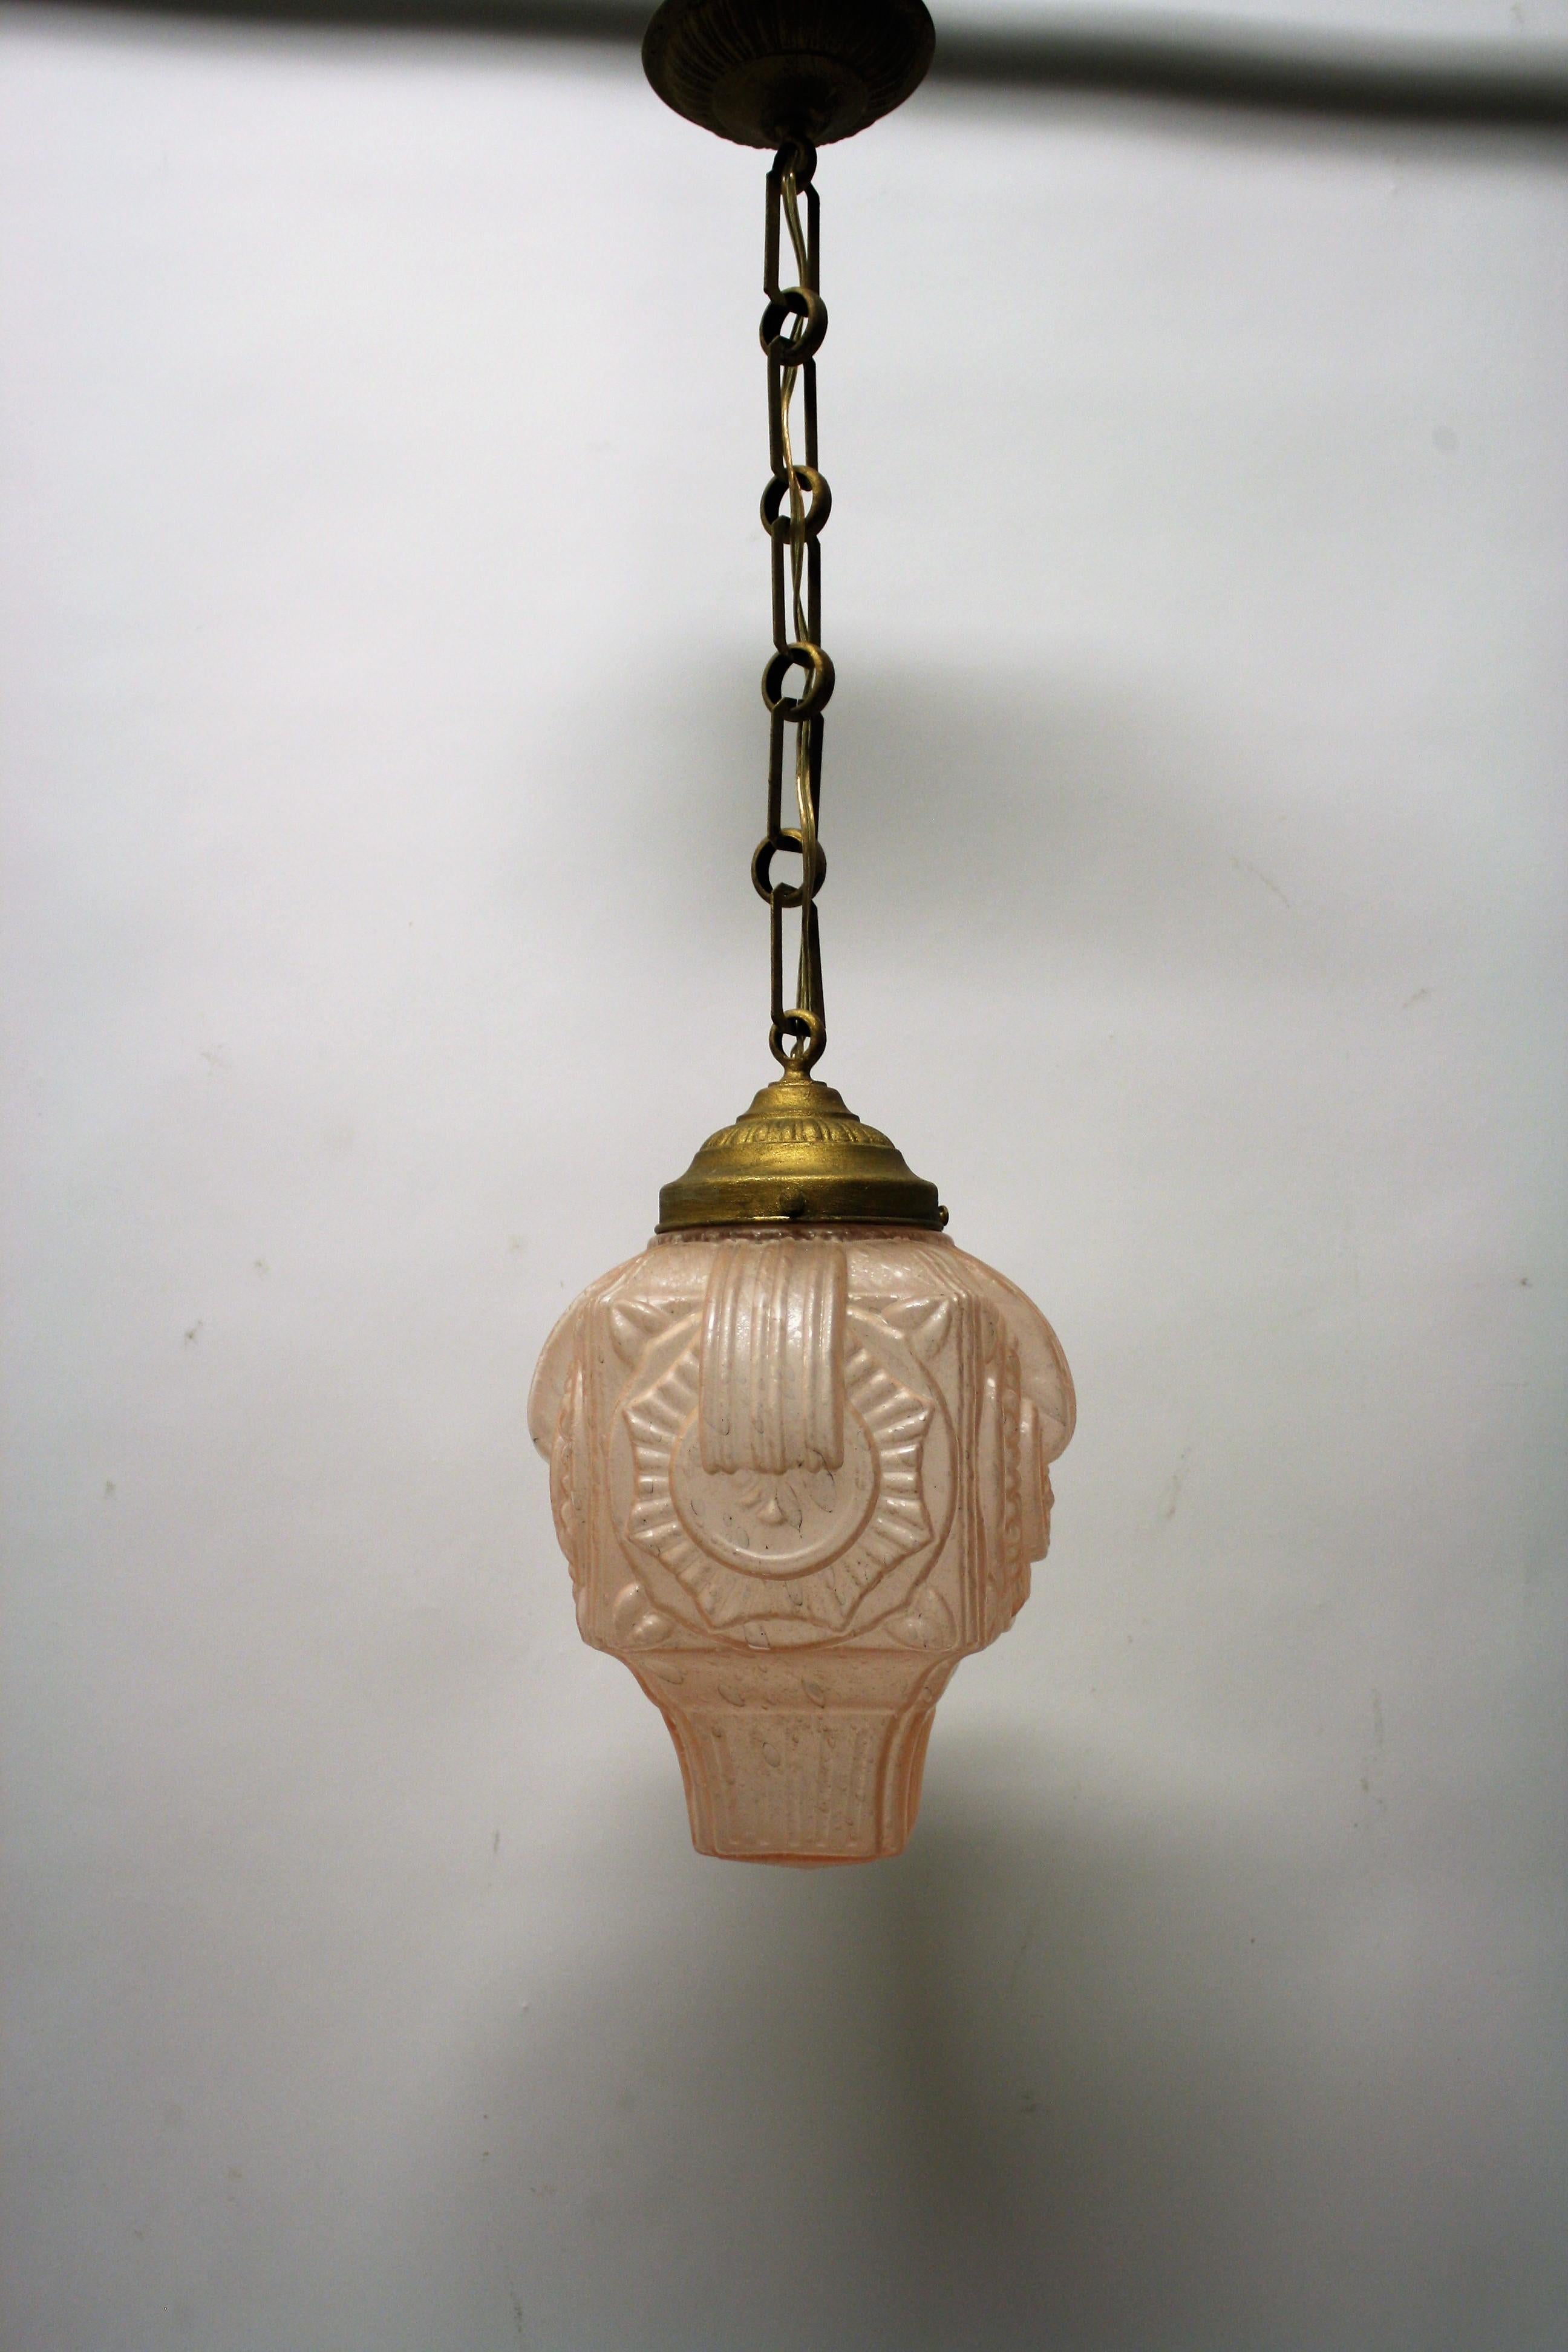 Original 1930s art deco pendant light made from pink crackled glass.

The lamp emits a beautiful warm light.

Good condition, tested and ready to use with a regular E26/E27 light bulb.

It comes with a period shade holder, chain and ceiling